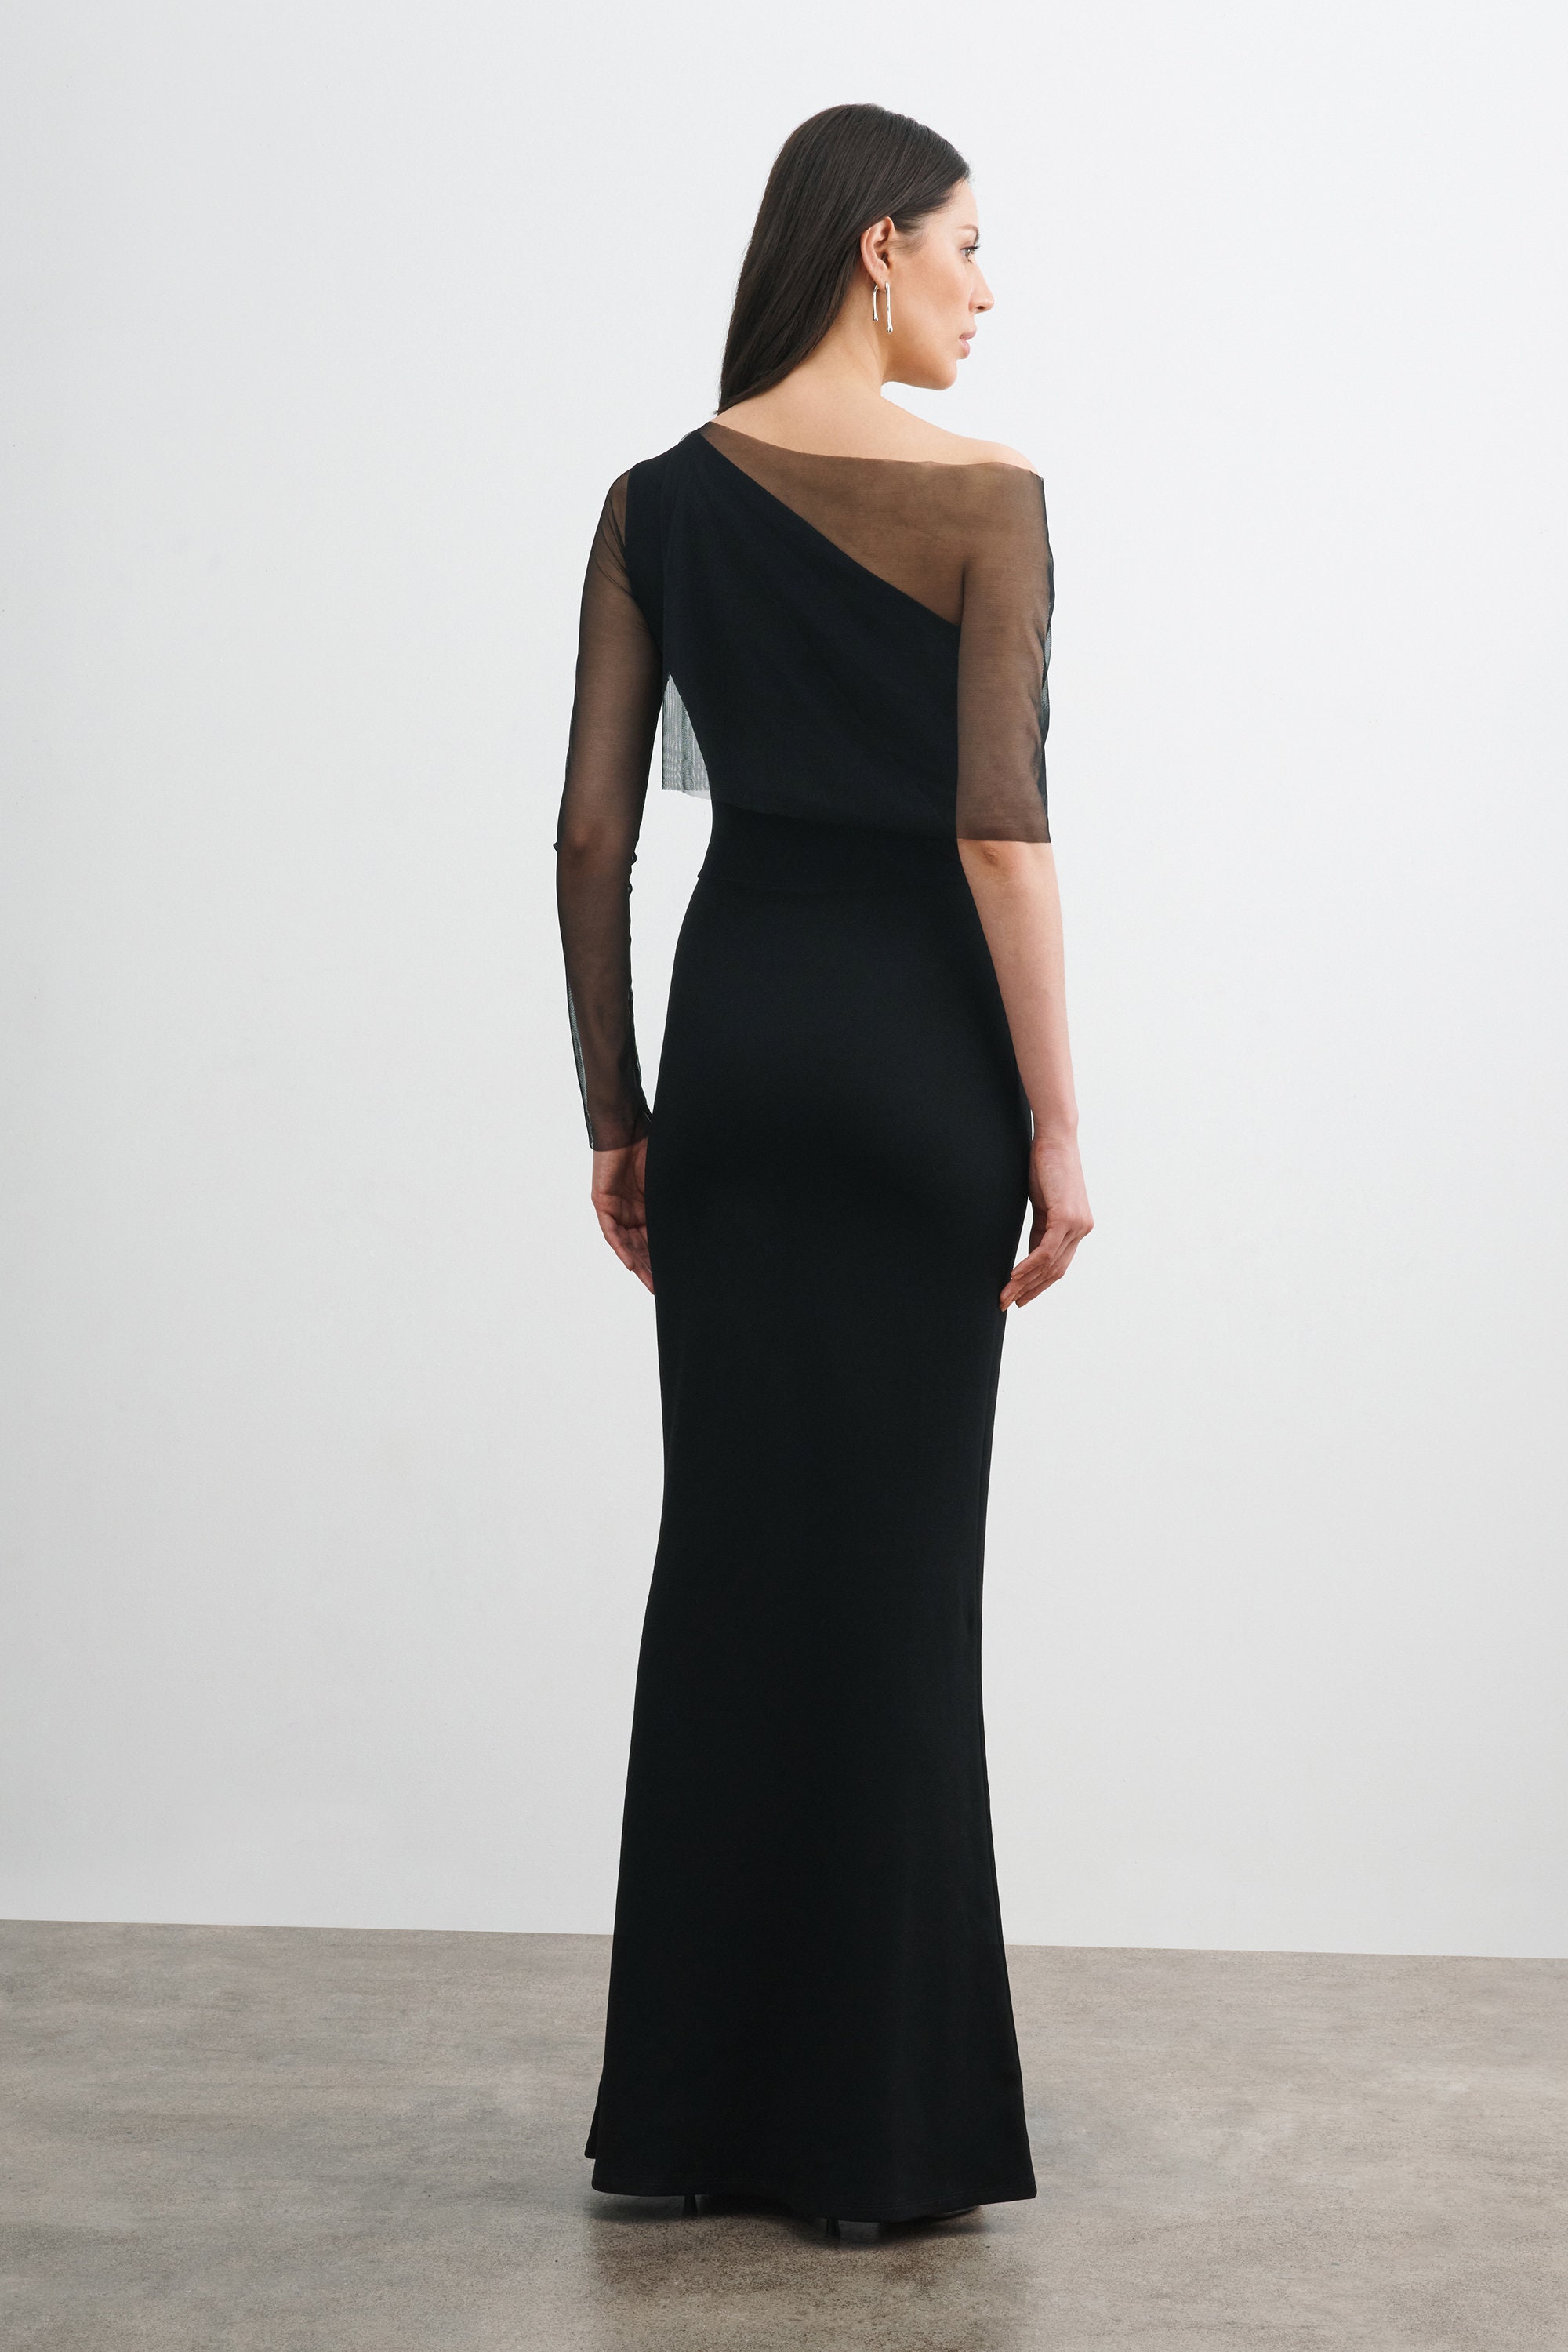 Black Formal Dress, Floor Length Gown, Fitted Evening Dress With